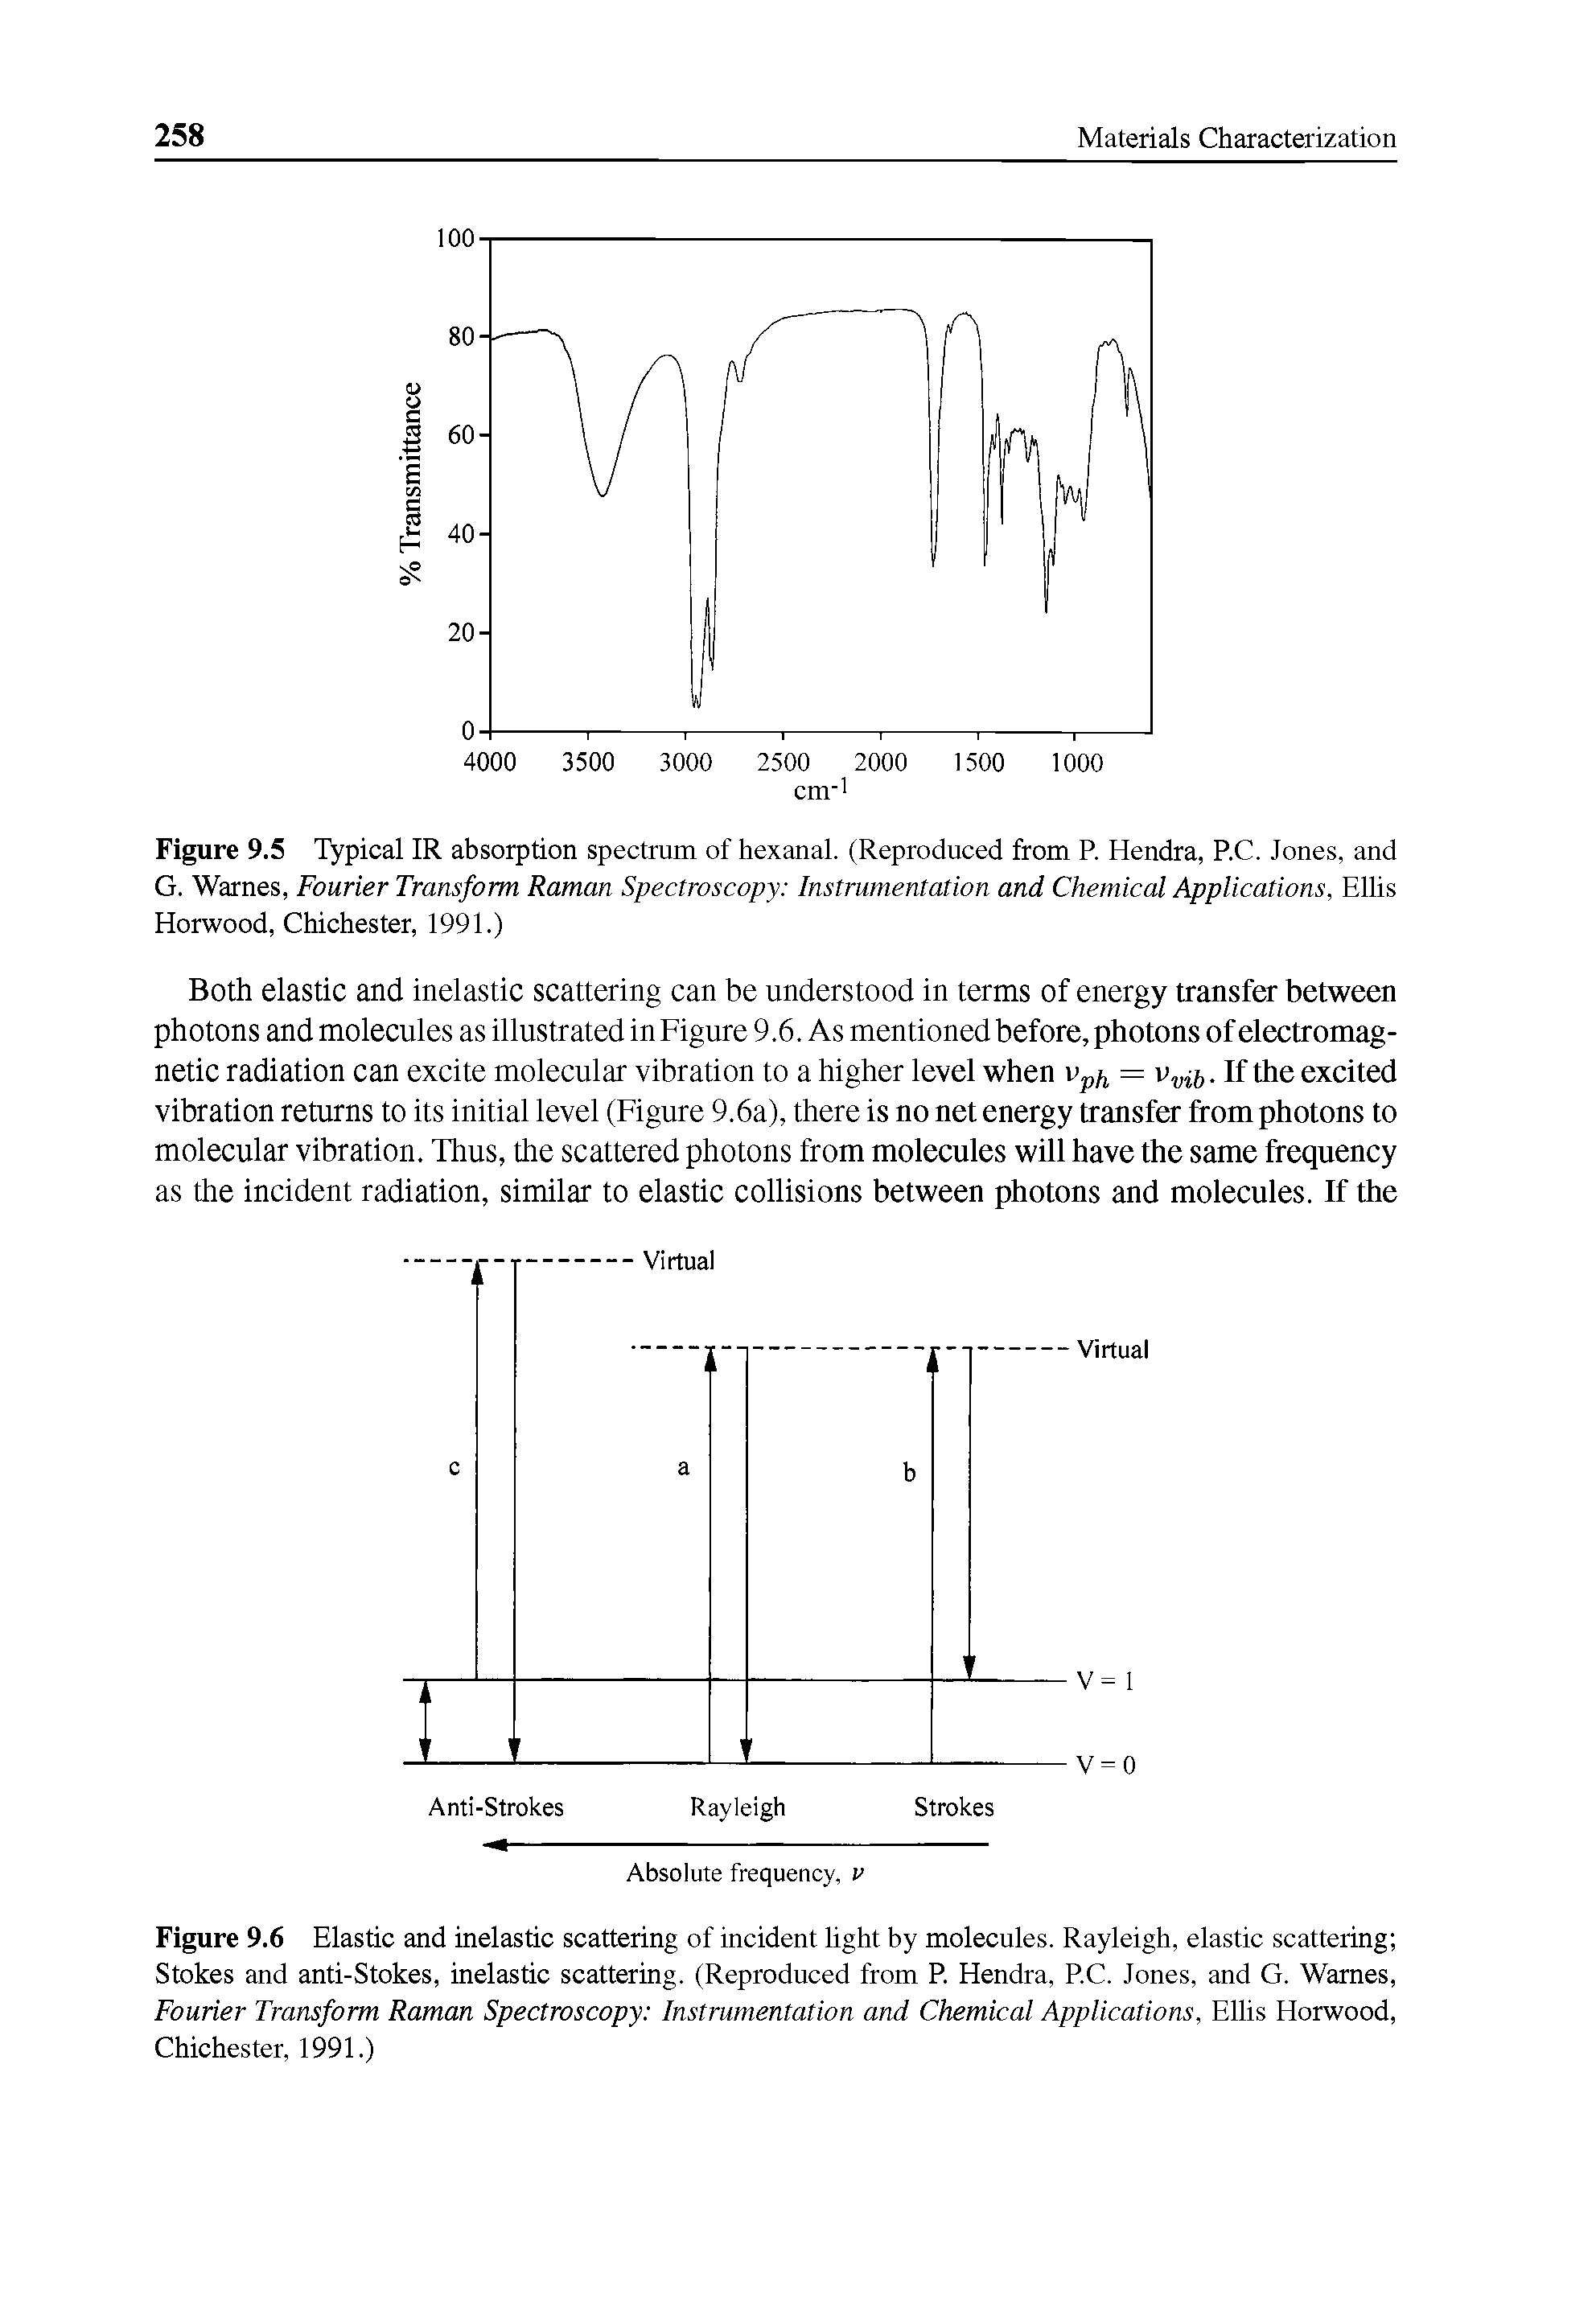 Figure 9.6 Elastic and inelastic scattering of incident light by molecules. Rayleigh, elastic scattering Stokes and anti-Stokes, inelastic scattering. (Reproduced from P. Hendra, P.C. Jones, and G. Warnes, Fourier Transform Raman Spectroscopy Instrumentation and Chemical Applications, Ellis Horwood, Chichester, 1991.)...